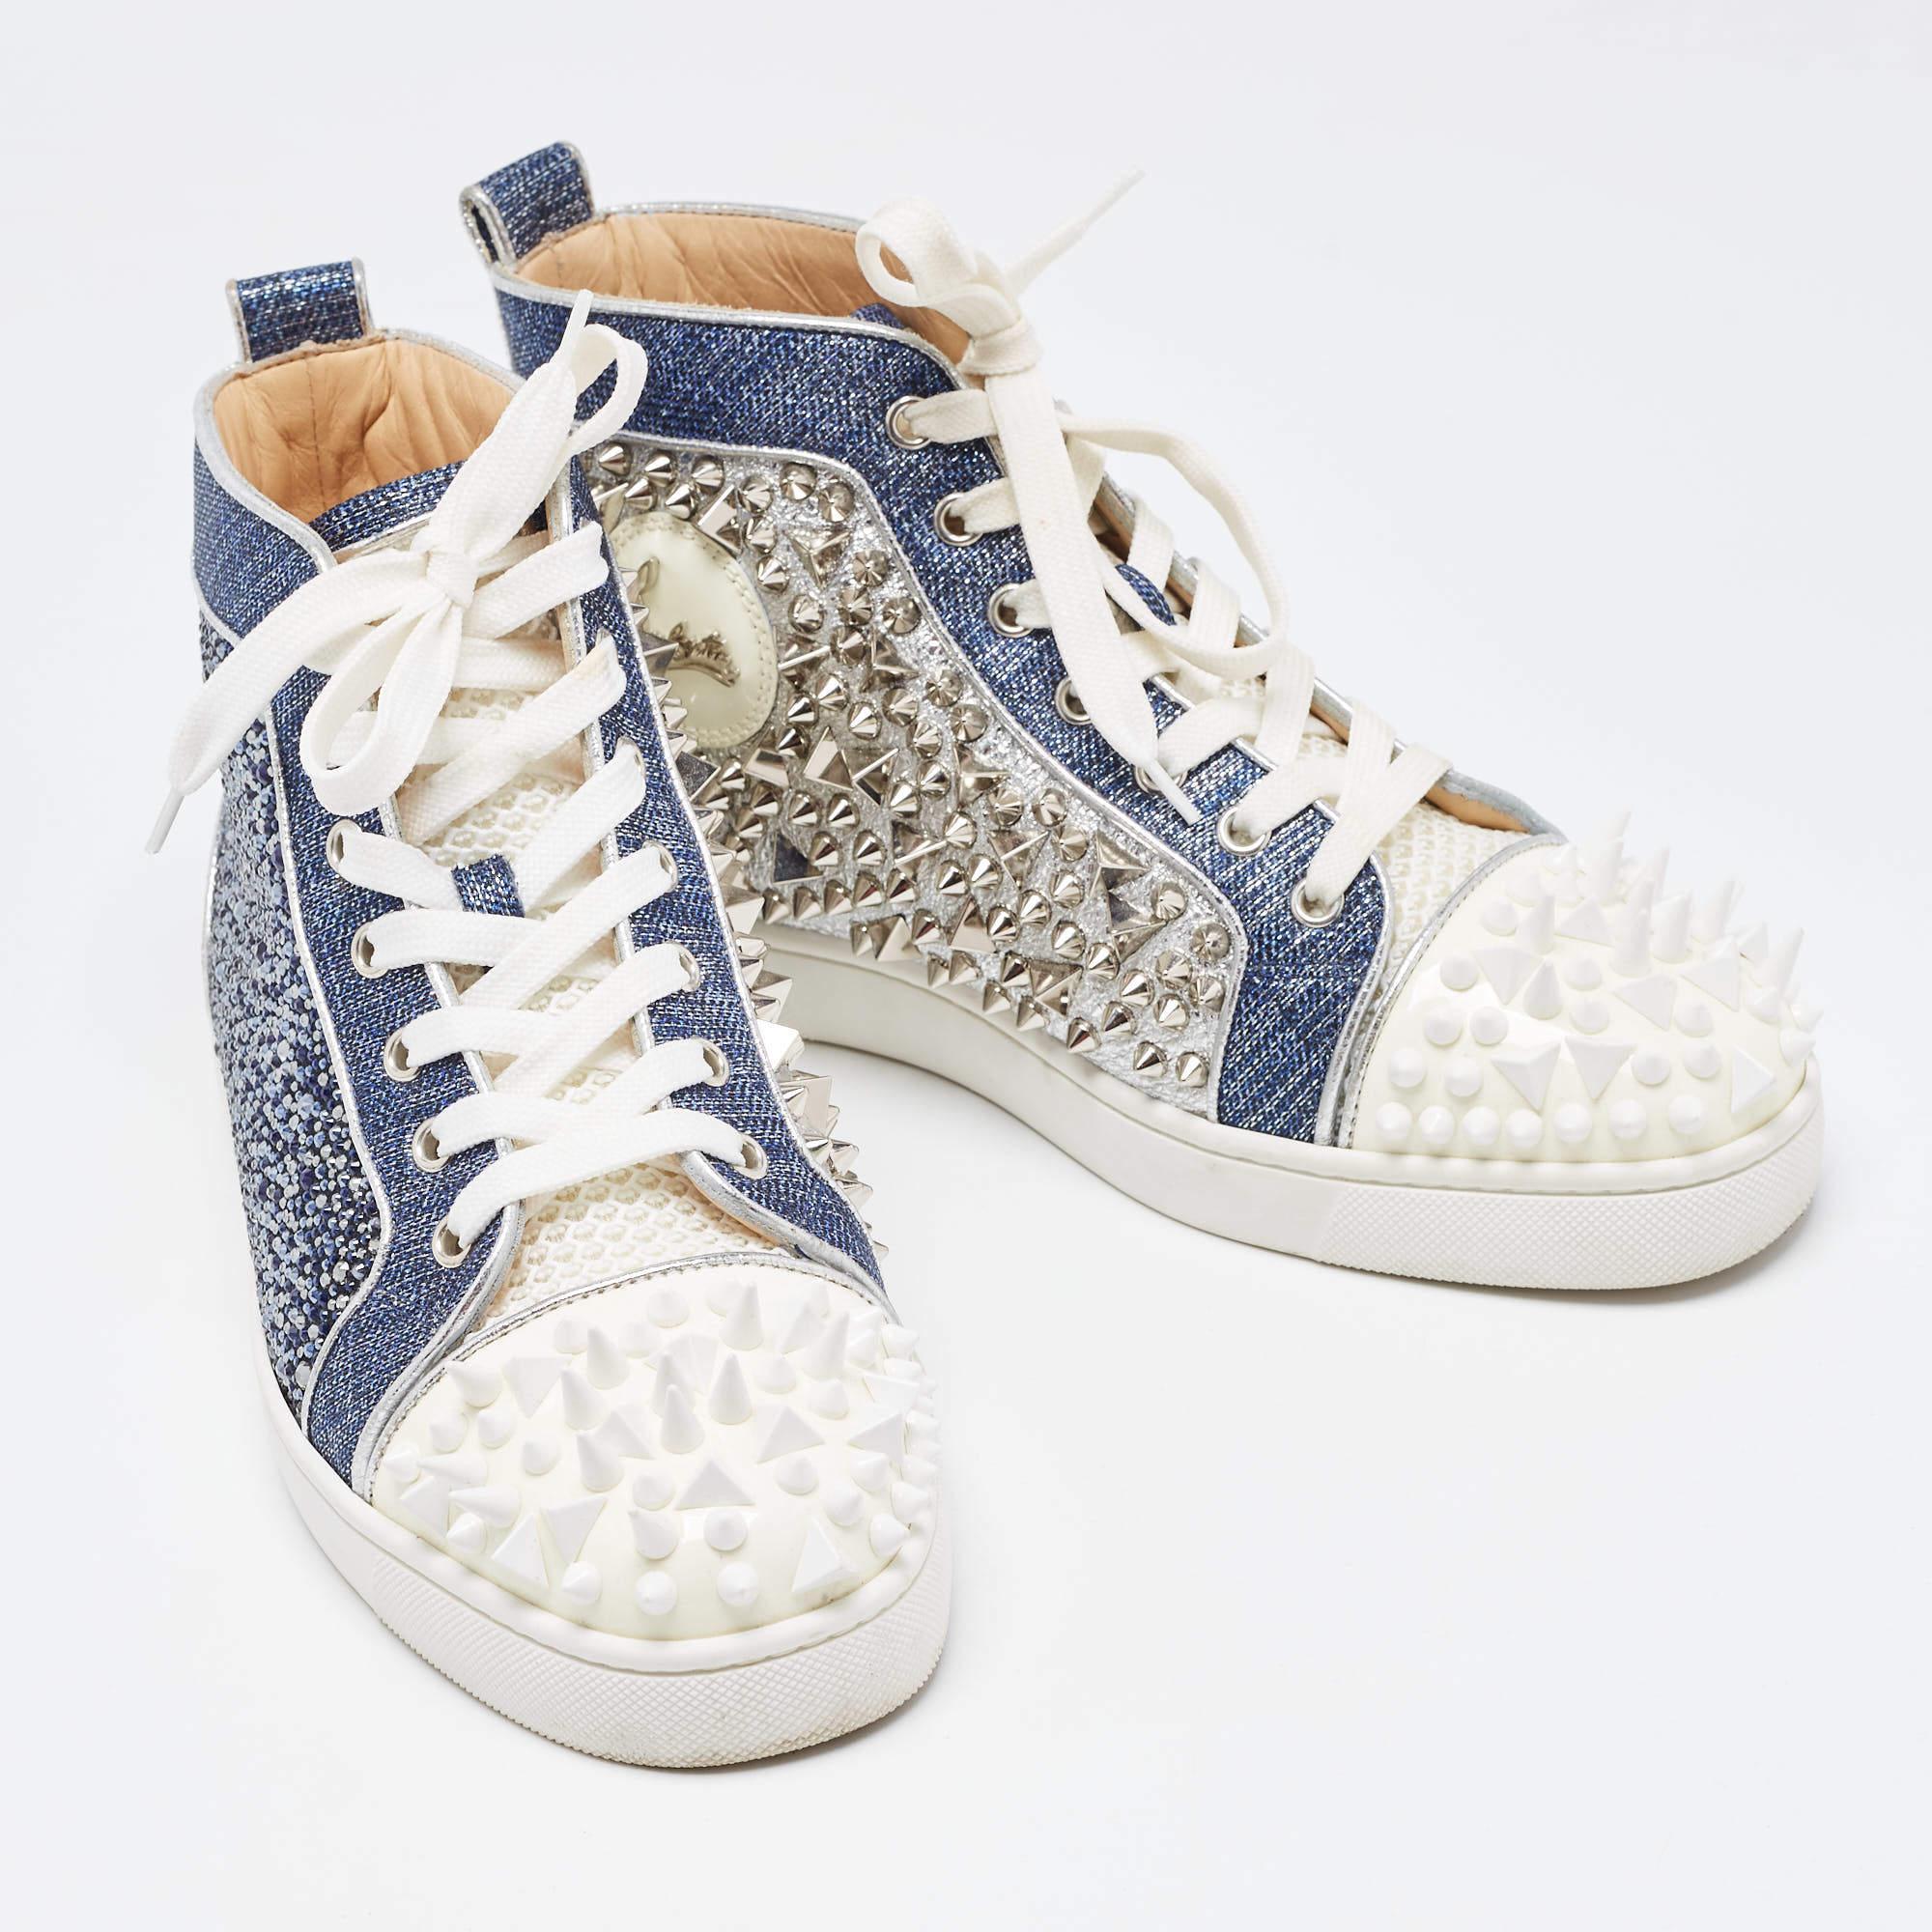 Give your outfit a luxe update with this pair of Christian Louboutin sneakers. The shoes are sewn perfectly to help you make a statement in them for a long time.

